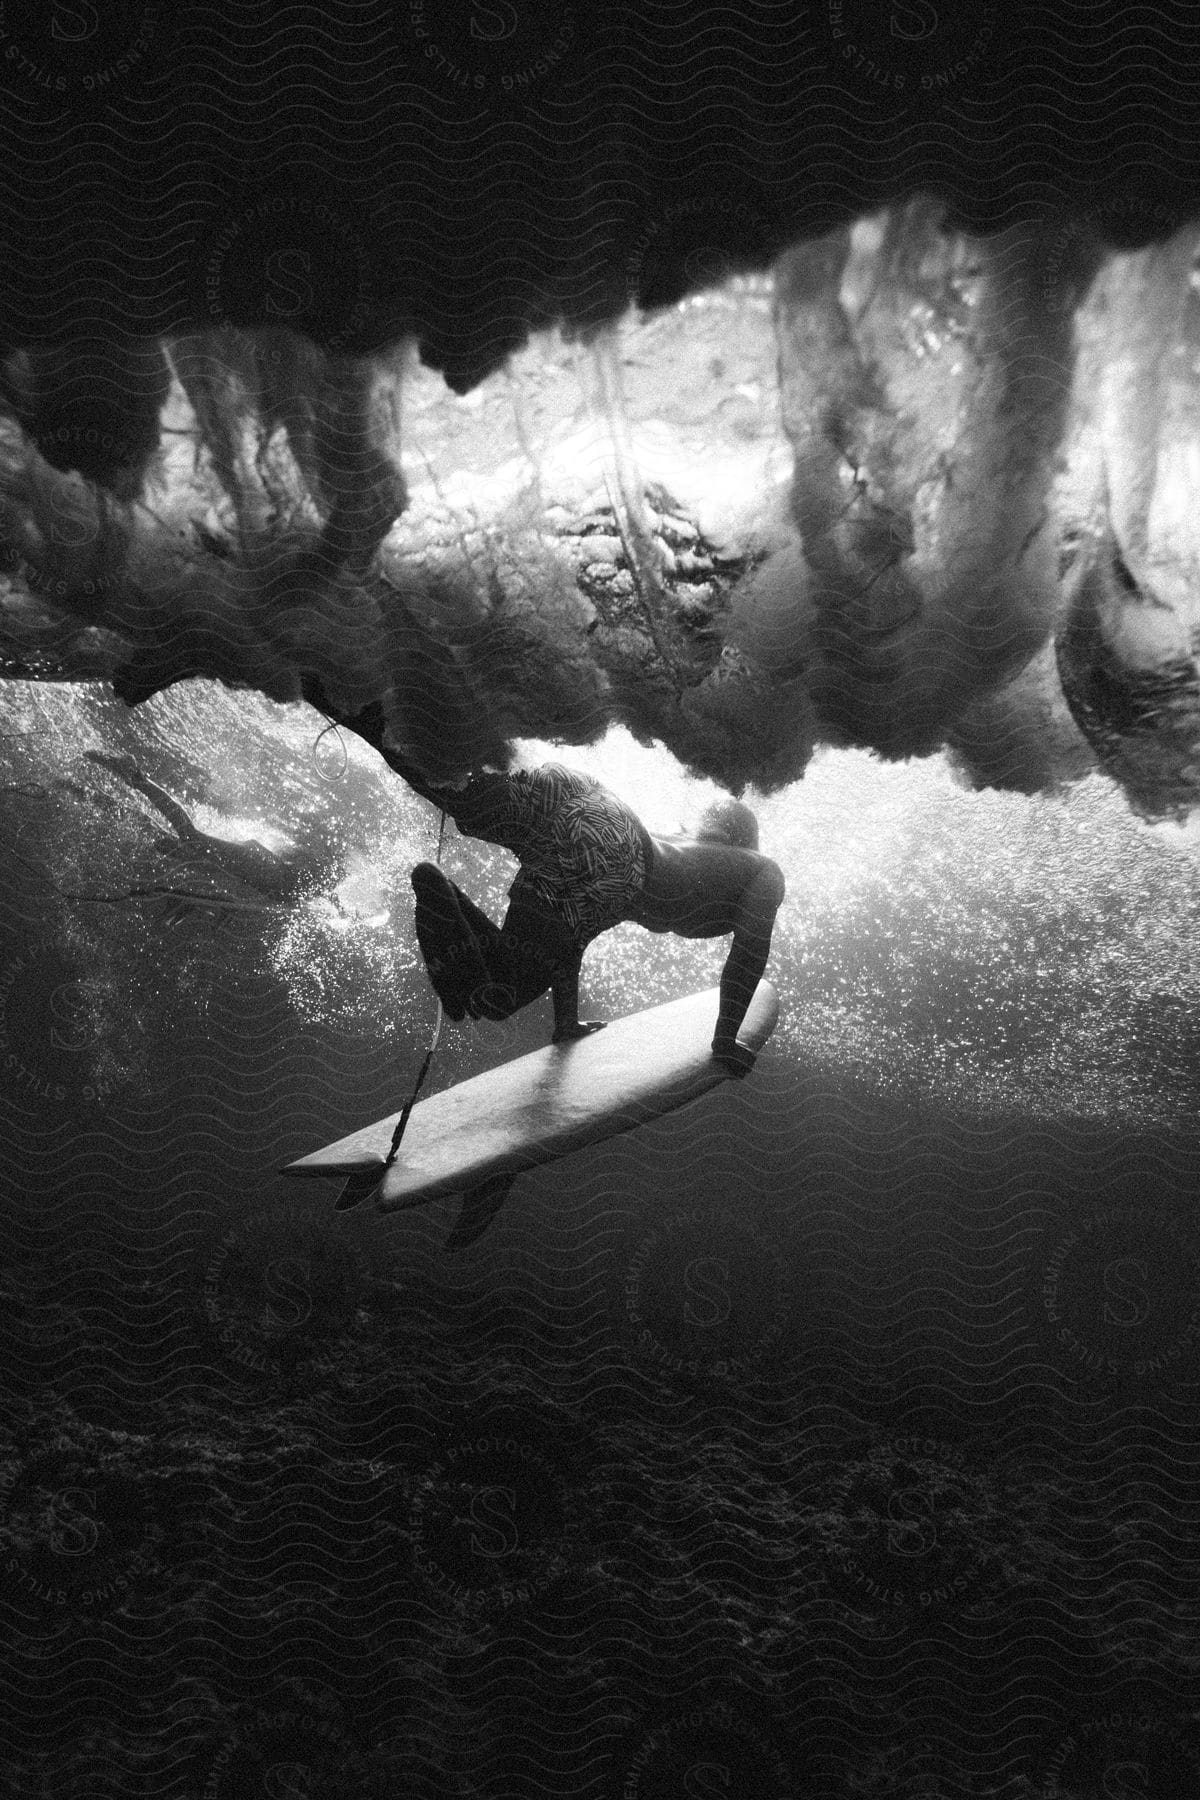 A man swimming under a wave with a surfboard captured in black and white underwater